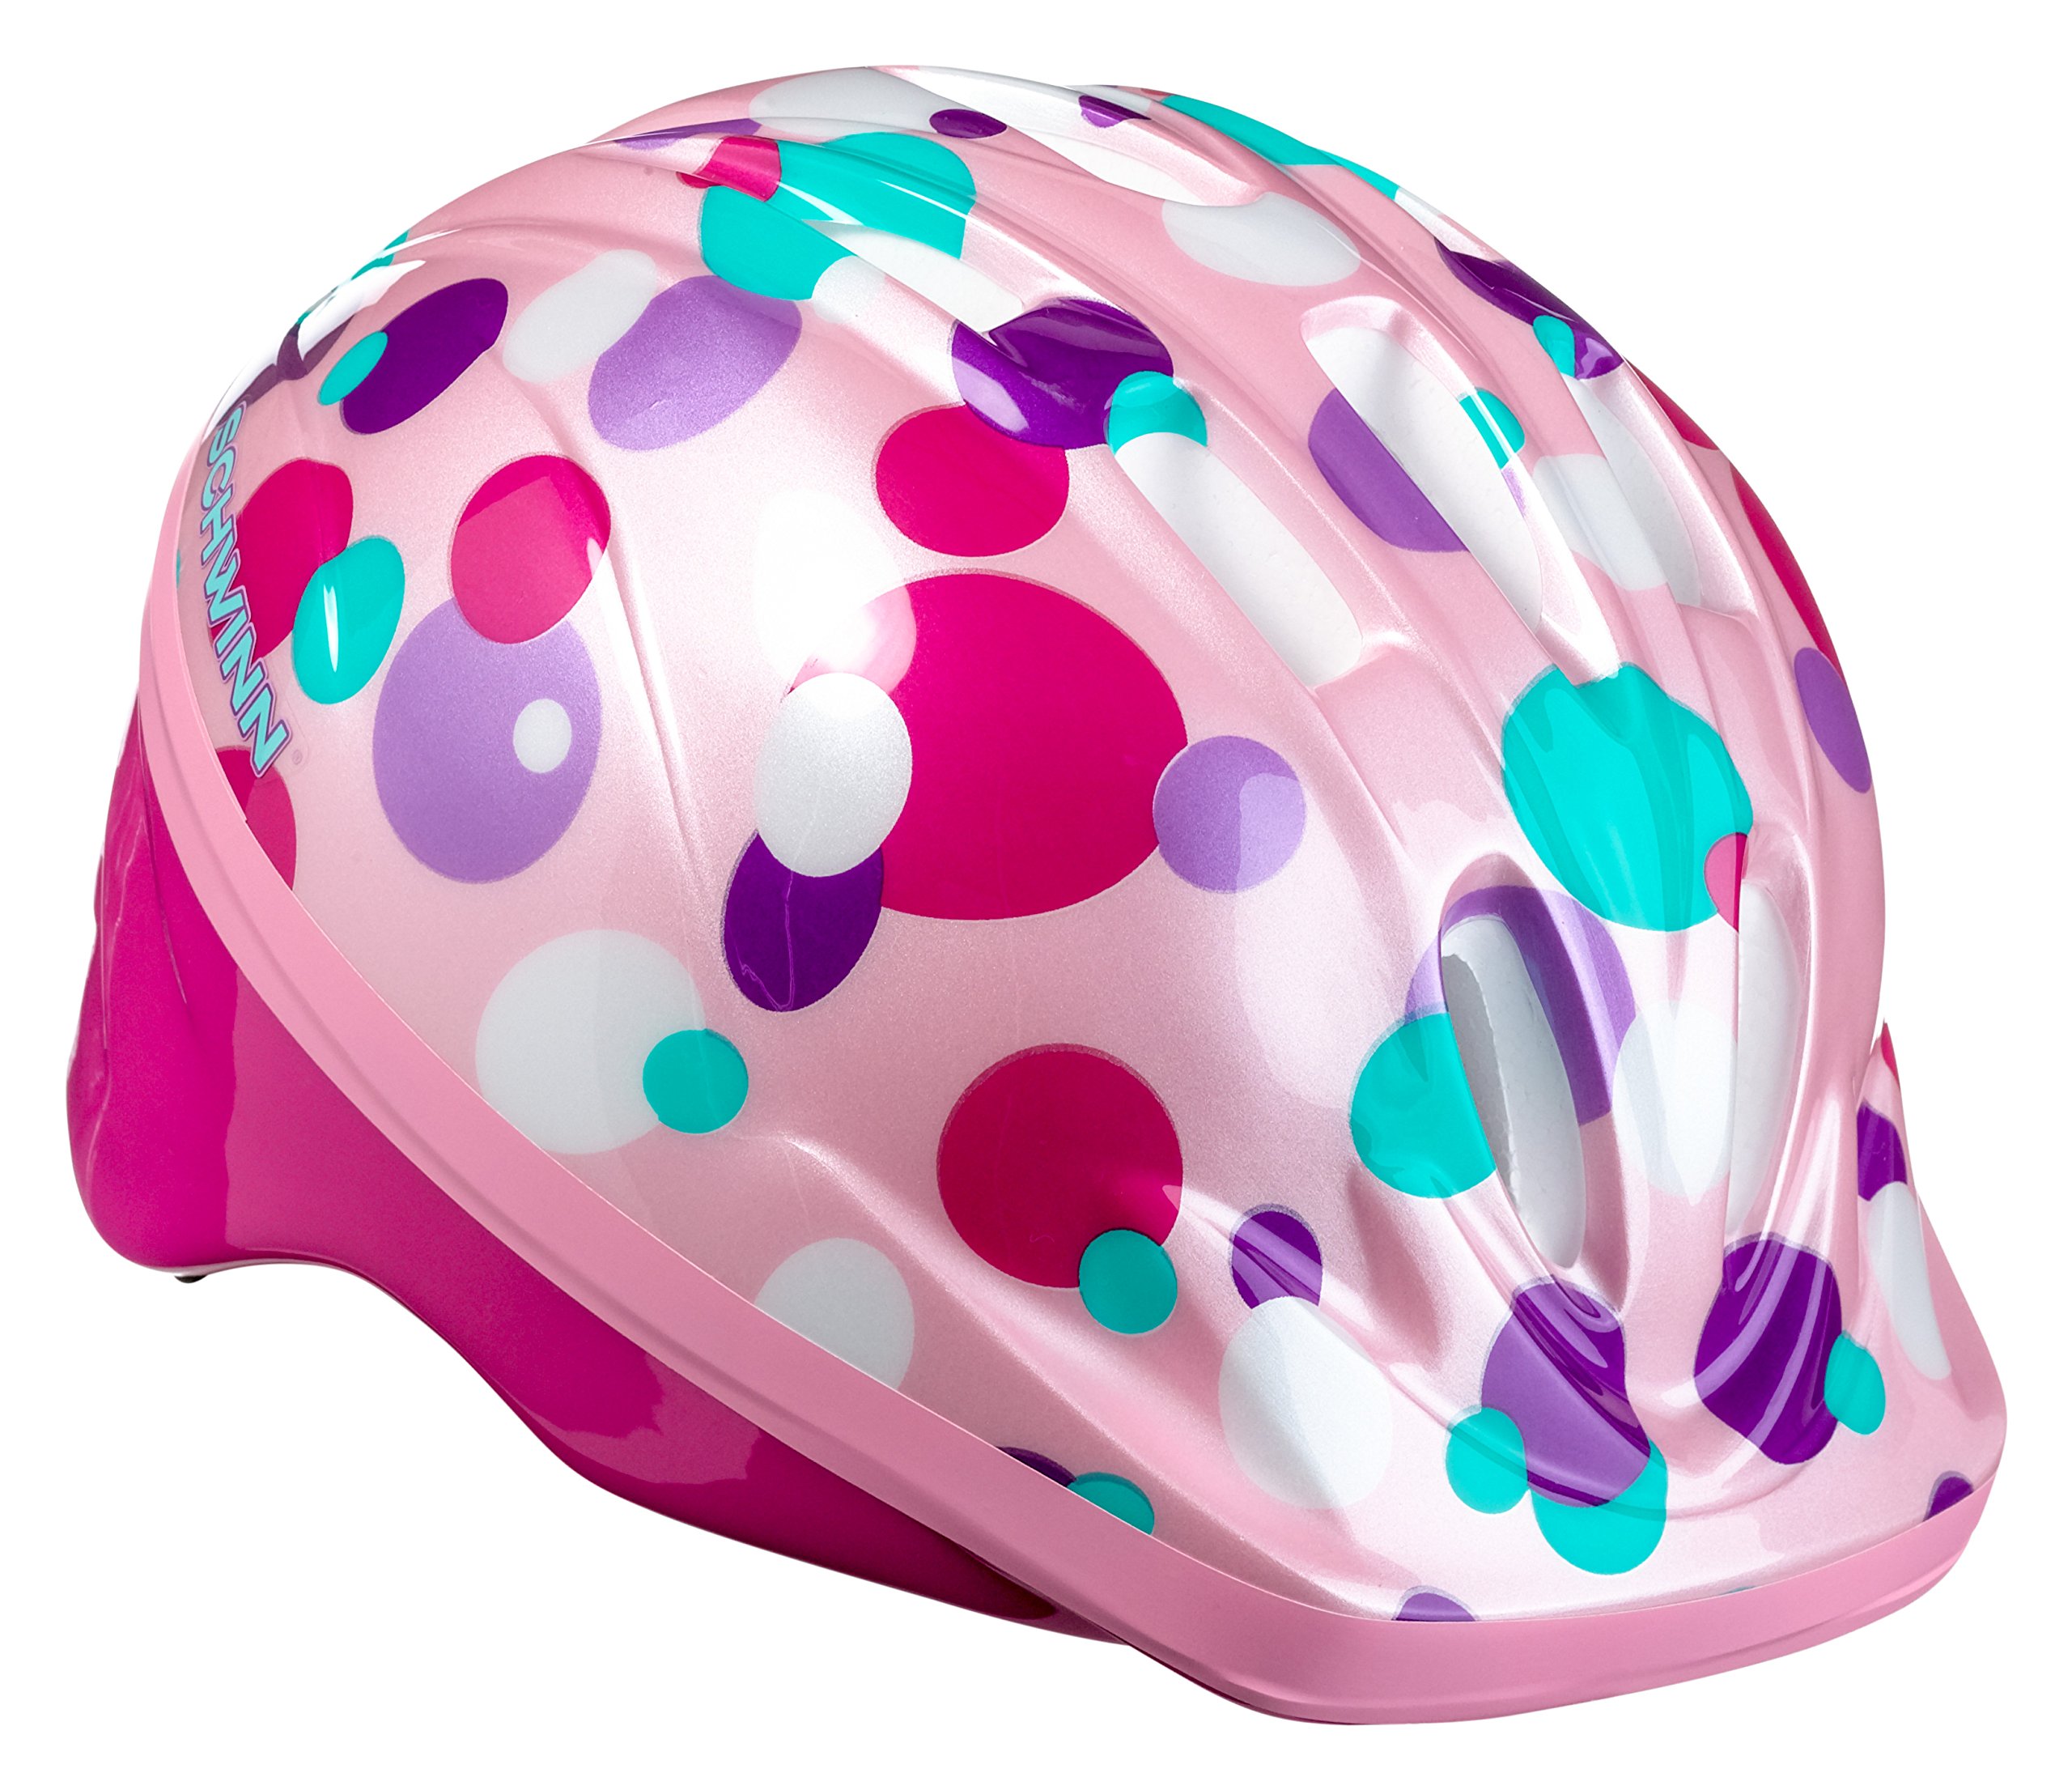 Schwinn Classic Toddler and Baby Bike Helmet, Dial Fit Adjustment, Kids Age 1 - 5 Year Olds, Girls and Boys Suggested Fit 44 - 52 cm